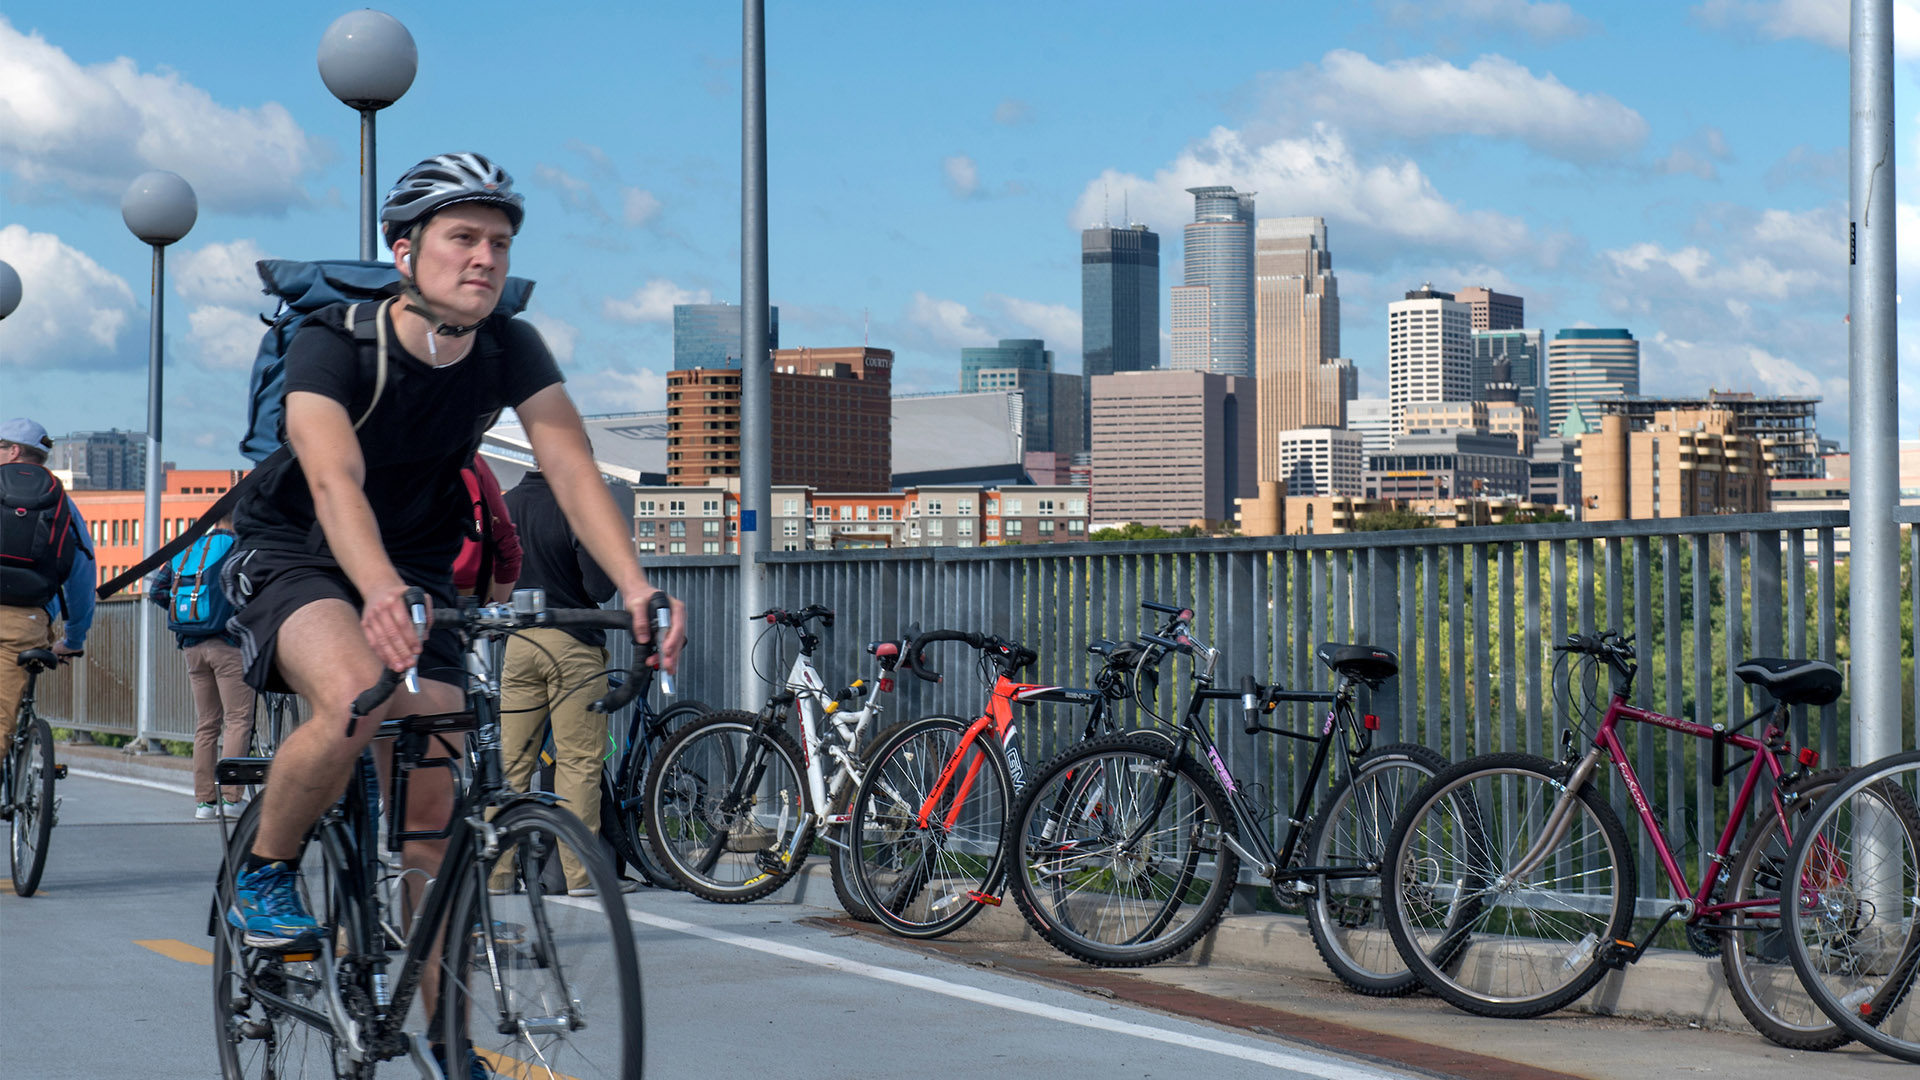 A student in a black shirt and shorts bikes down the Washington Avenue Bridge, with the Minneapolis skyline in the background